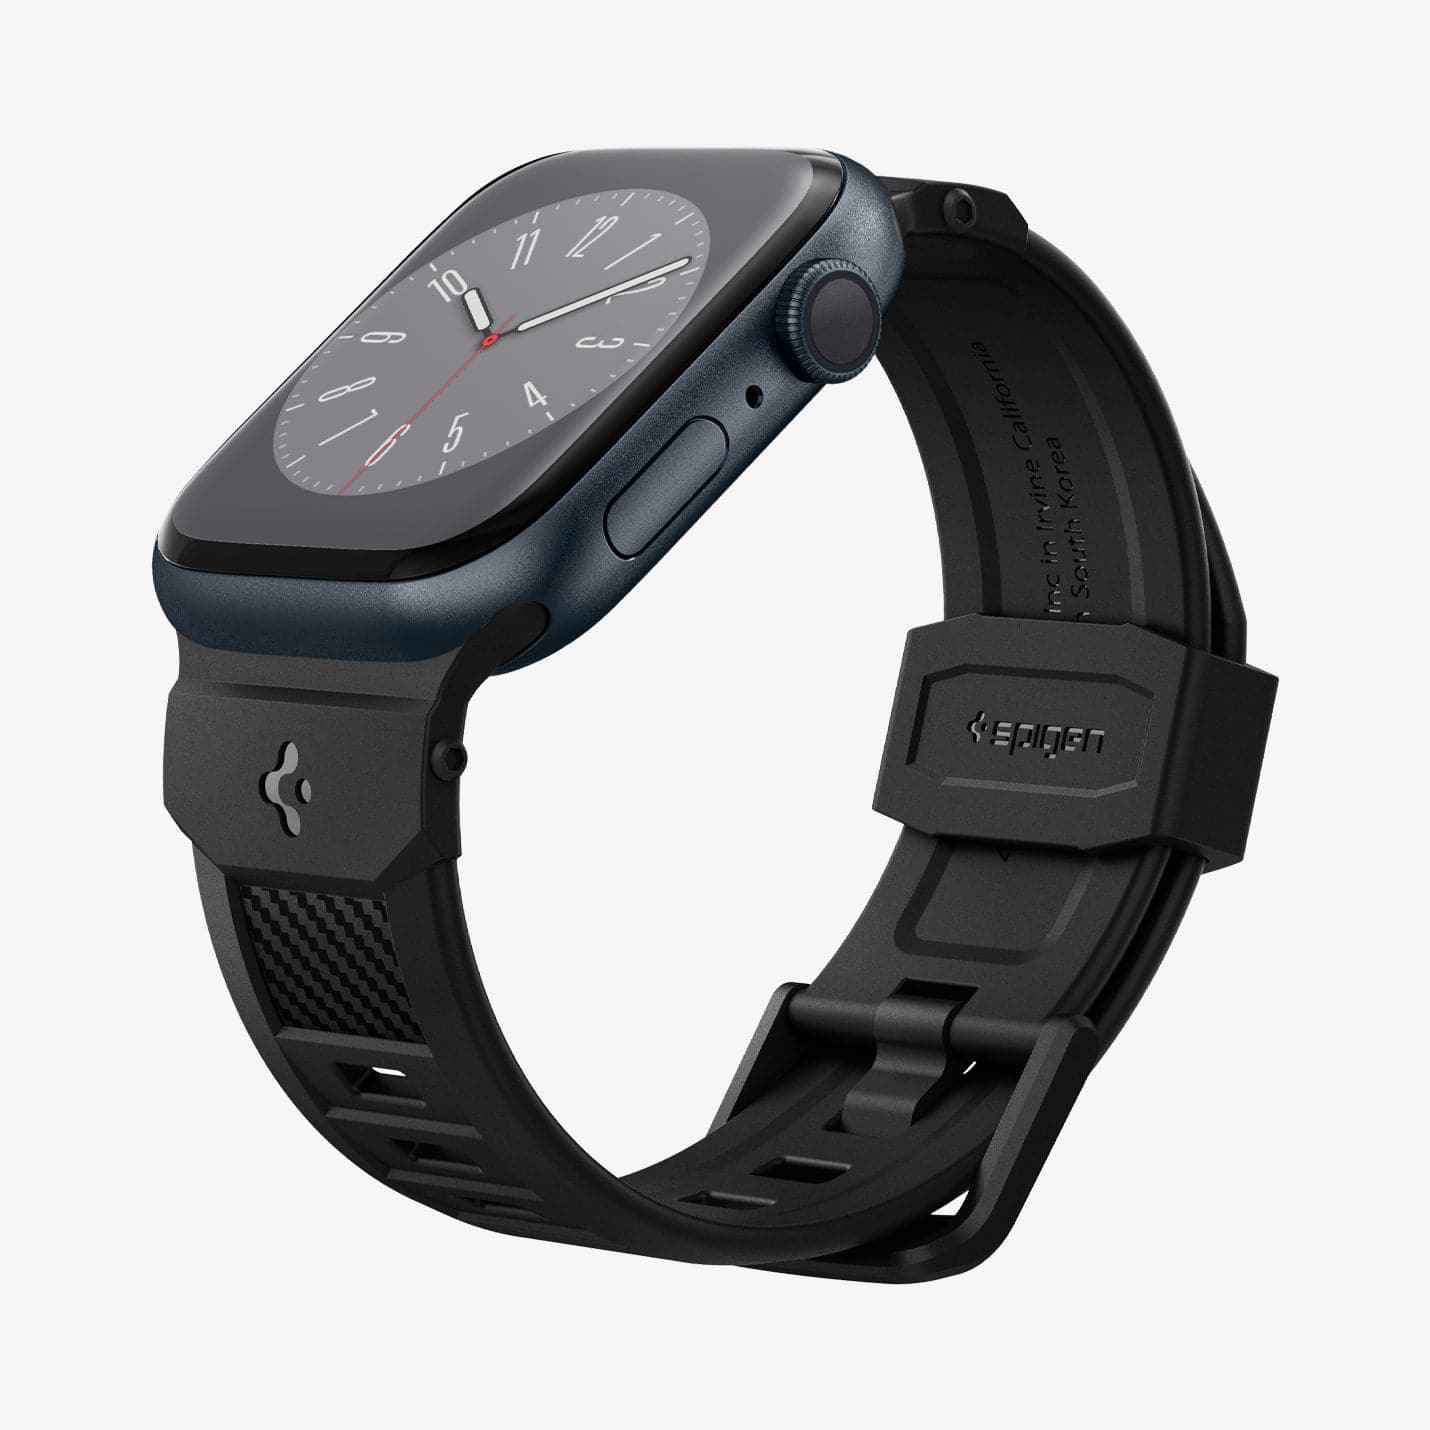 AMP02855 - Apple Watch Series (Apple Watch (41mm)/Apple Watch (38mm)) in matte black showing the front, side and inside of band